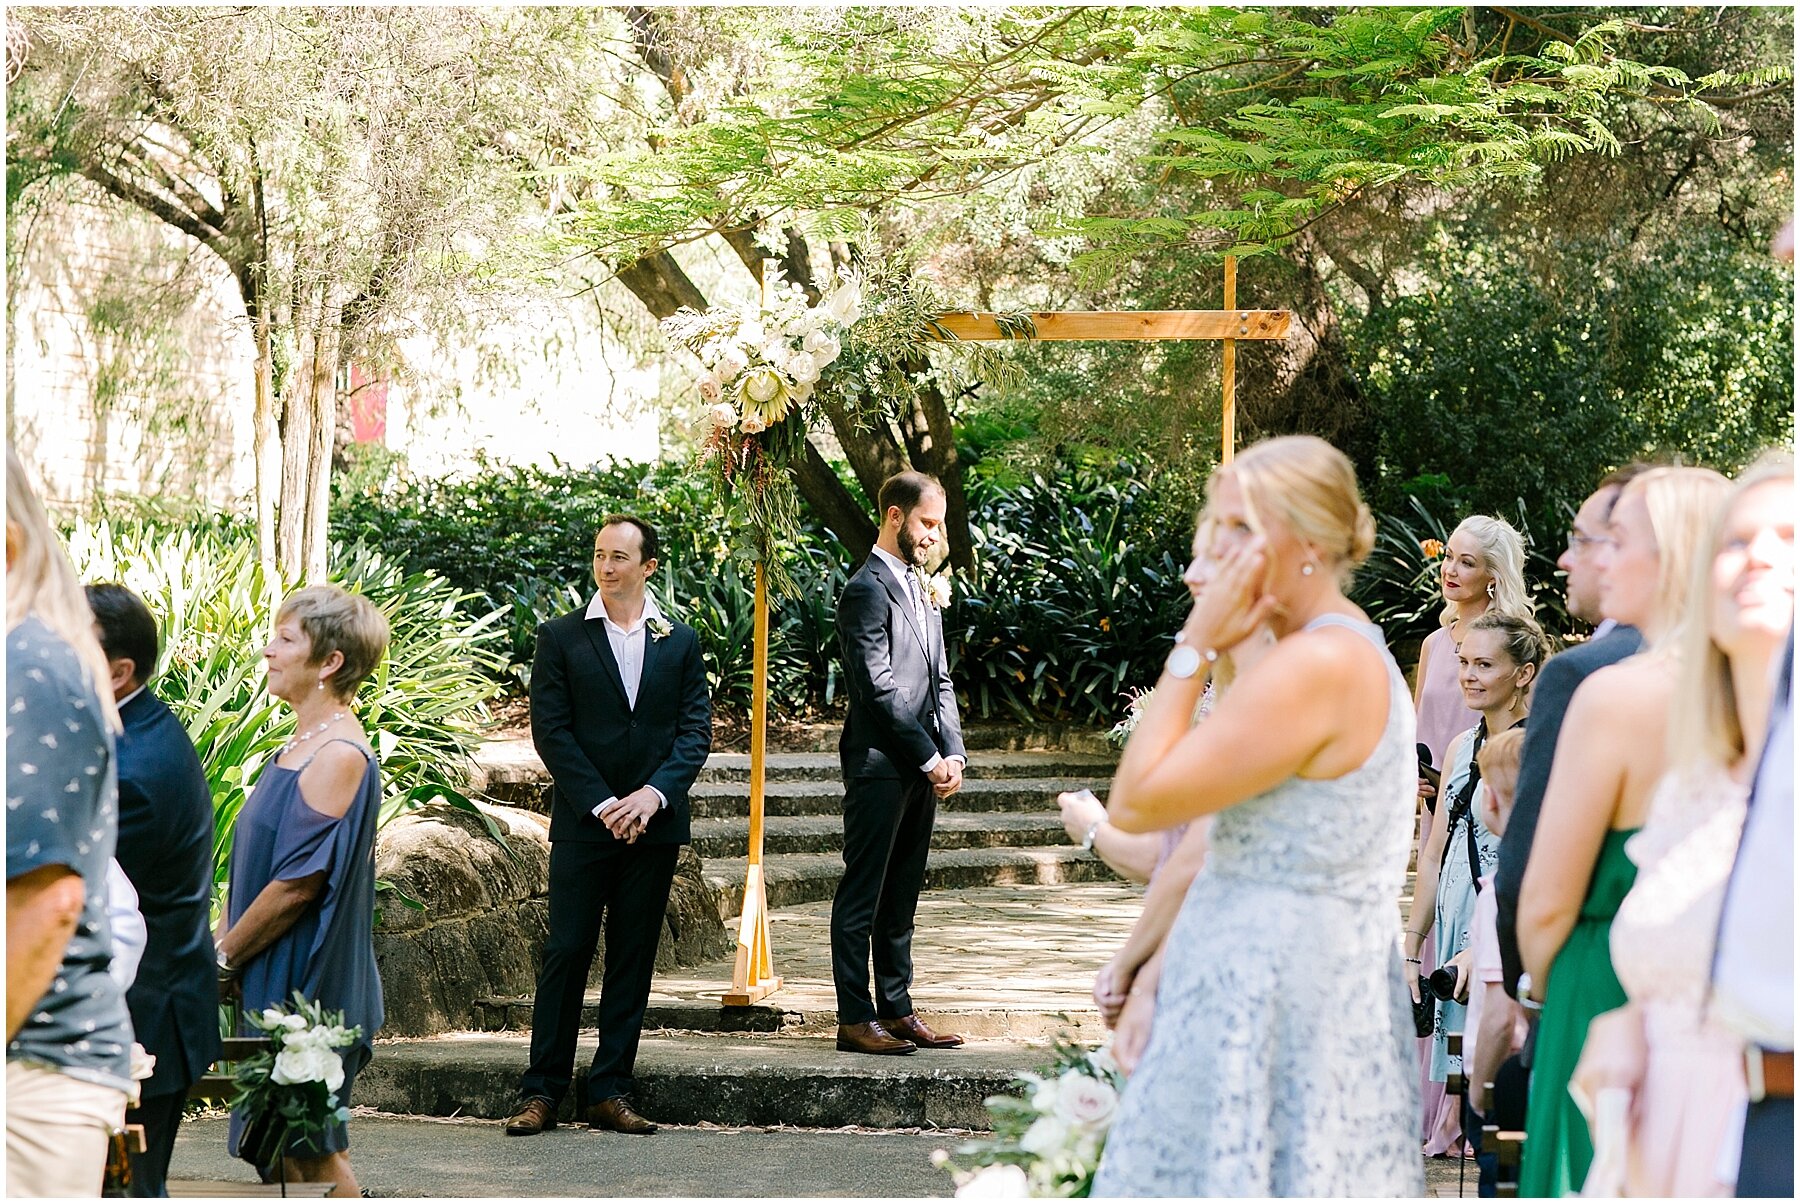 Groom at top of aisle waiting for bride | UWA Wedding Ceremony